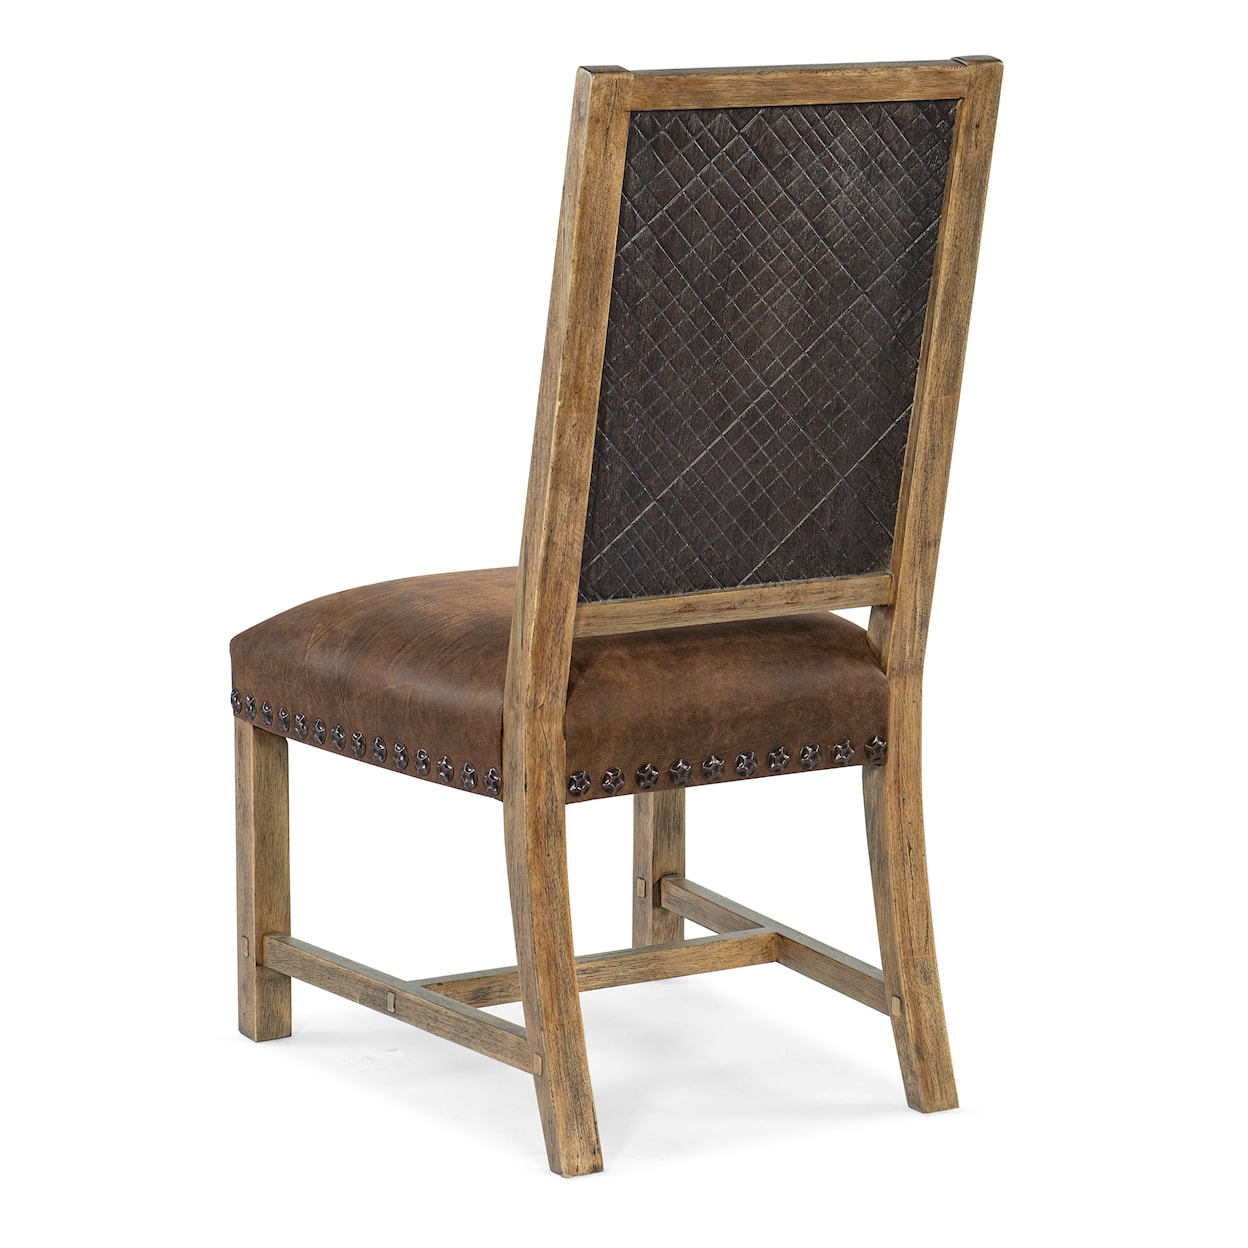 Hooker Furniture Big Sky Upholstered Side Chair with Leather Cushion